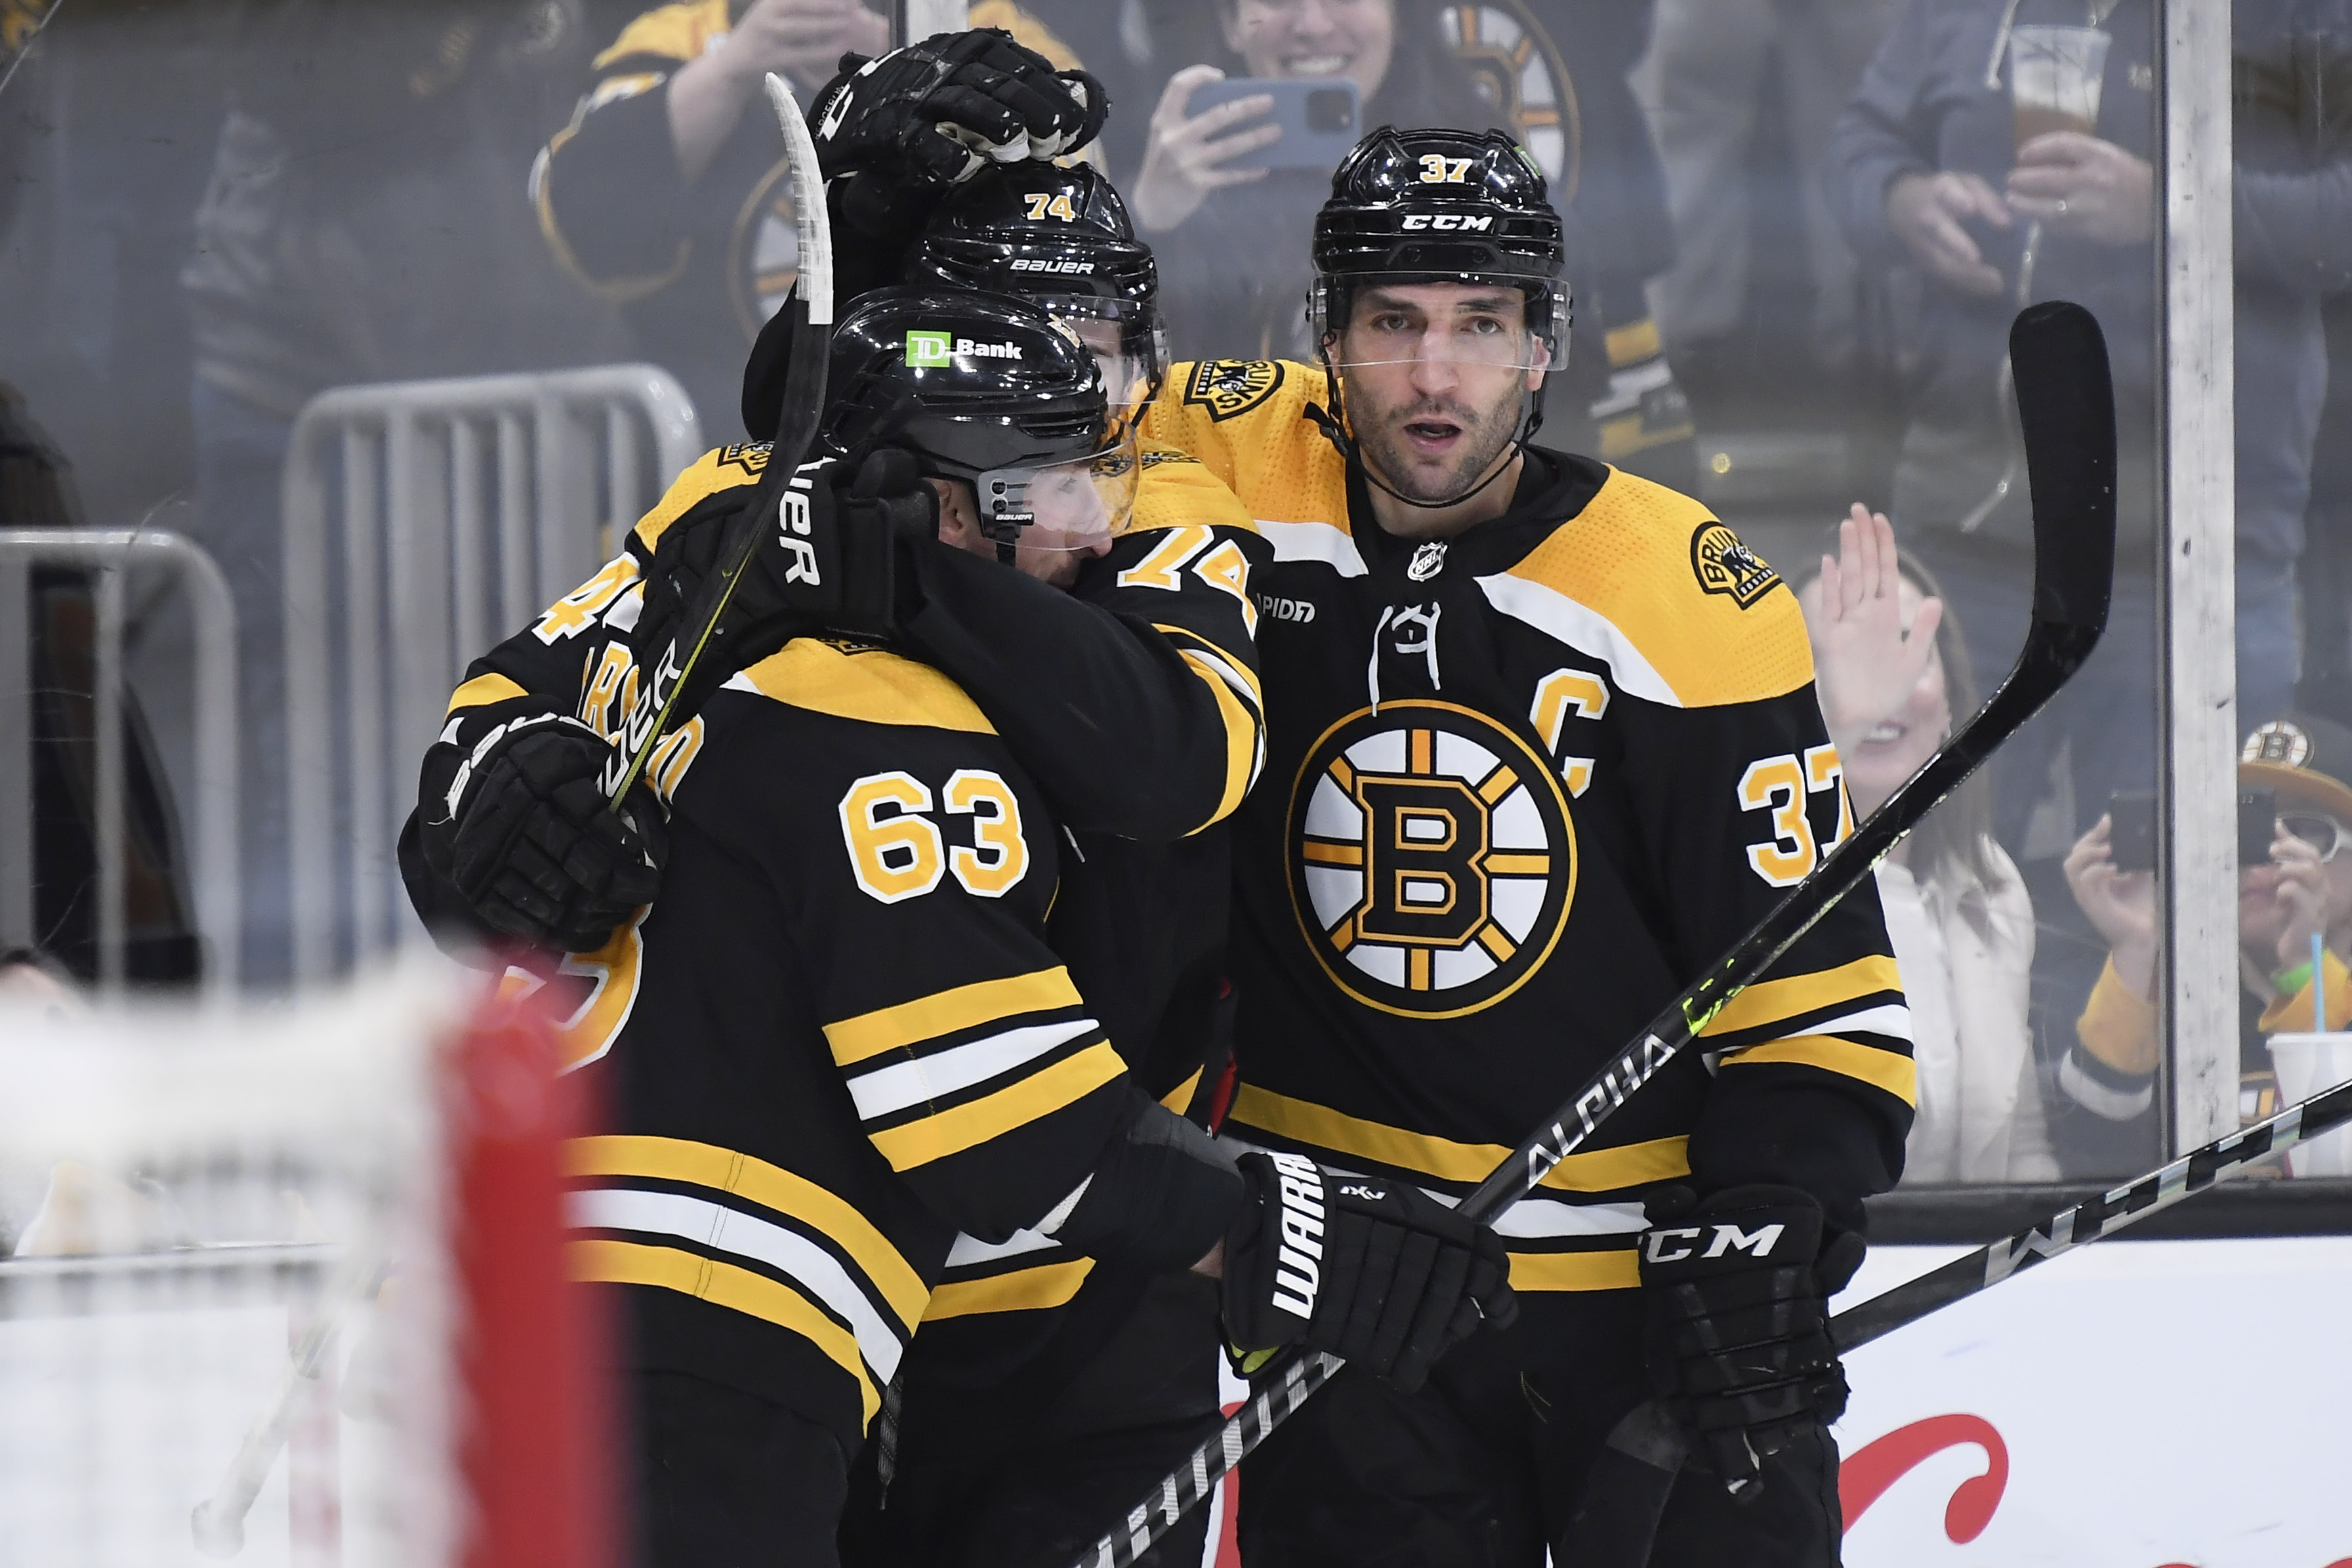 Patrice Bergeron, Boston Bruins forward and captain, announces retirement  after 19 seasons - Boston News, Weather, Sports